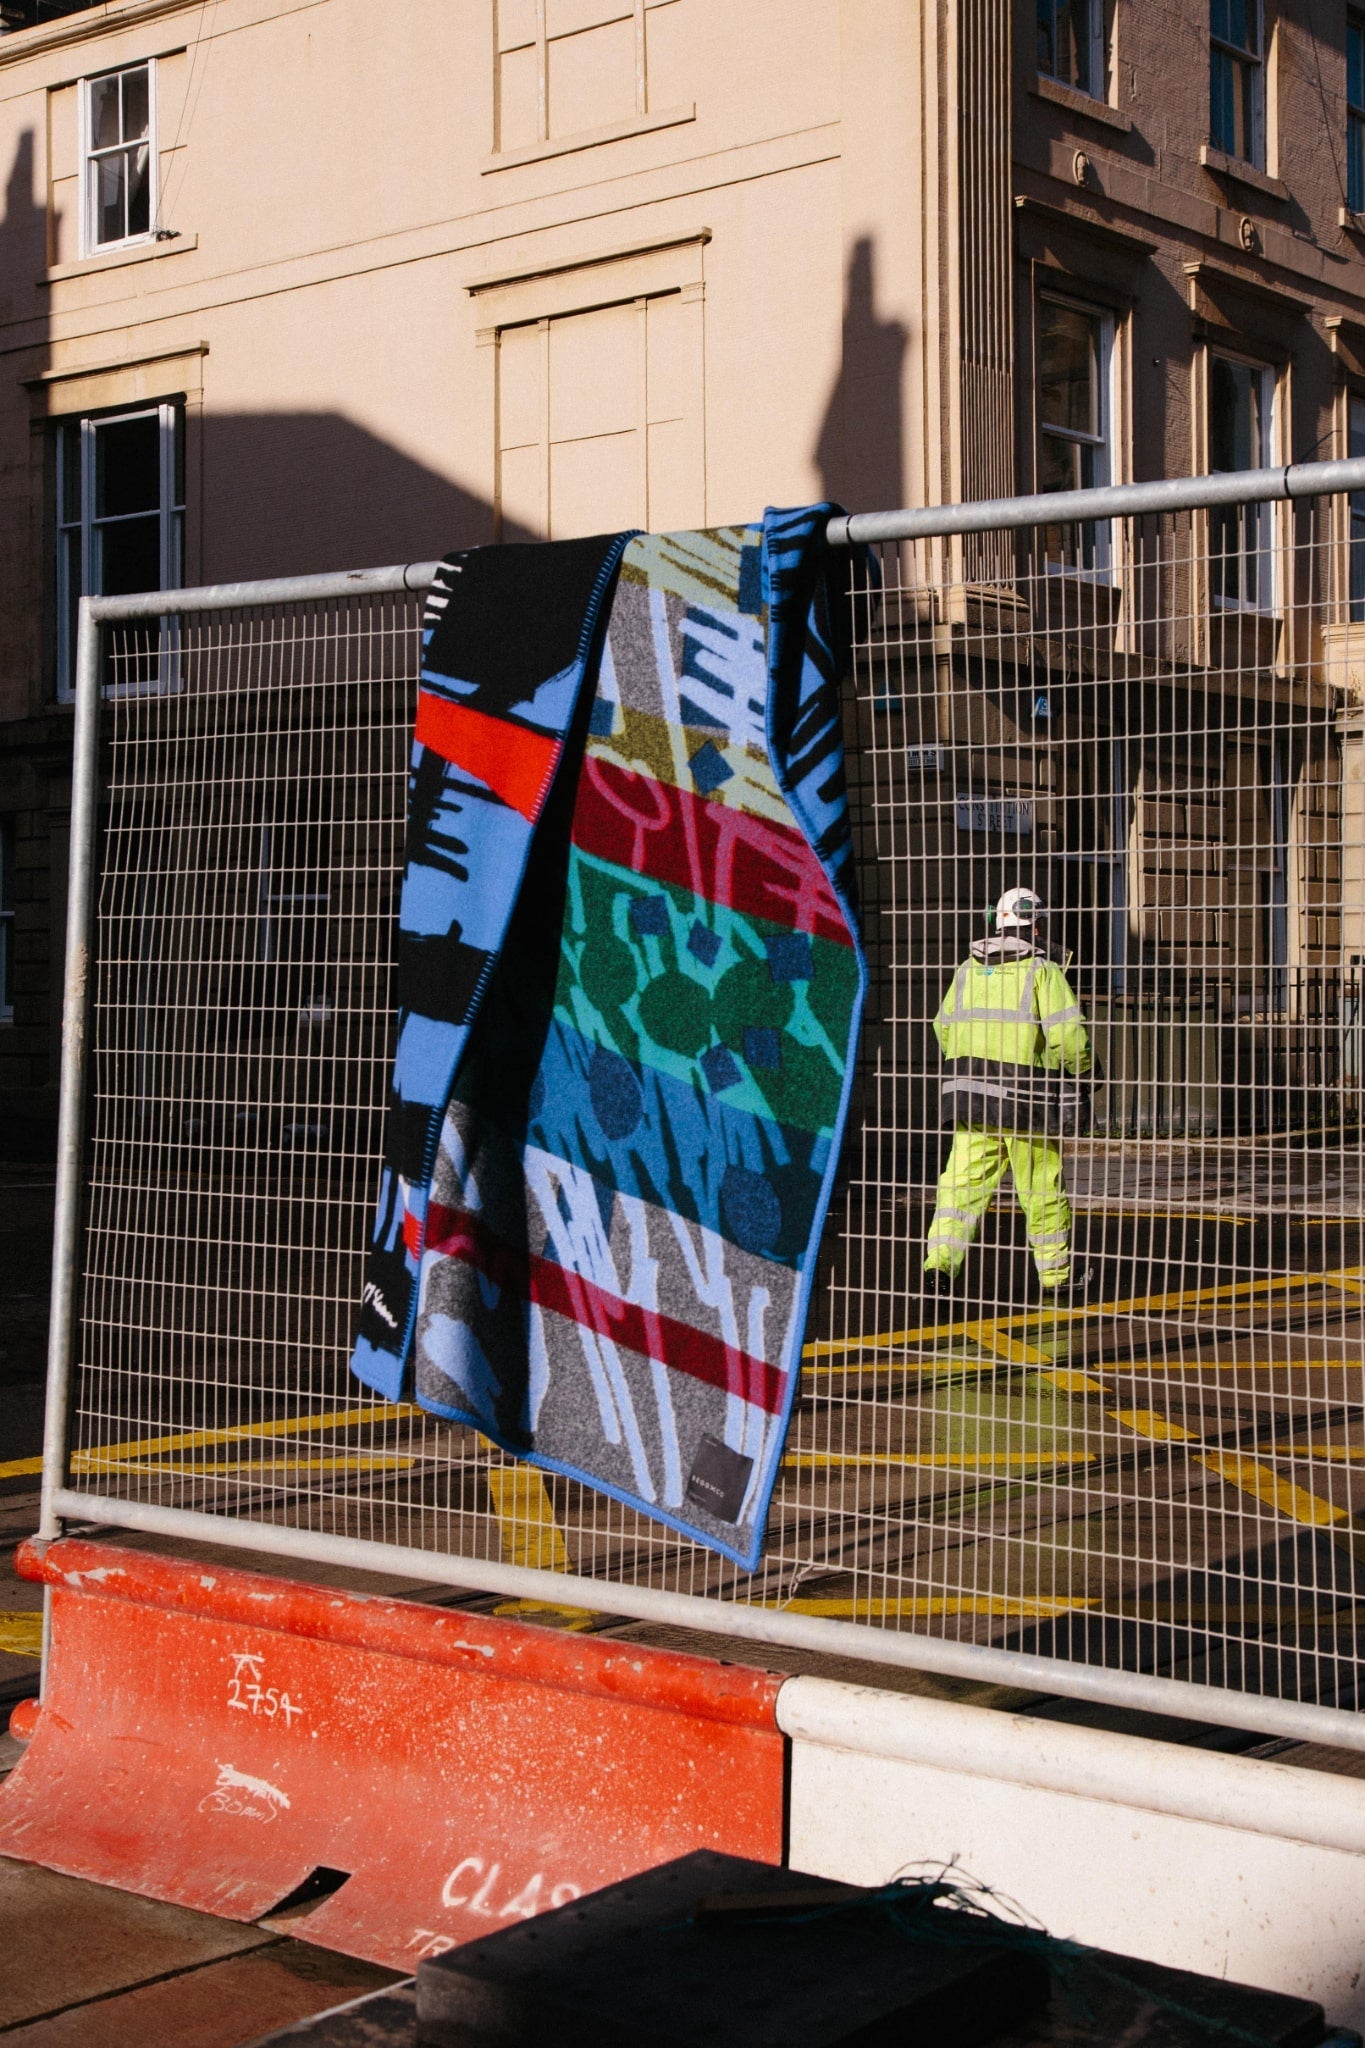 ALT=Large woven lambswool and cashmere blanket in blues, black, reds, greens and yellow with graphic hand-drawn lines that have been translated using a jacquard loom. Blanket laid over a traffic works fence in Leith, Edinburgh. with a worked in high-viz in the background.